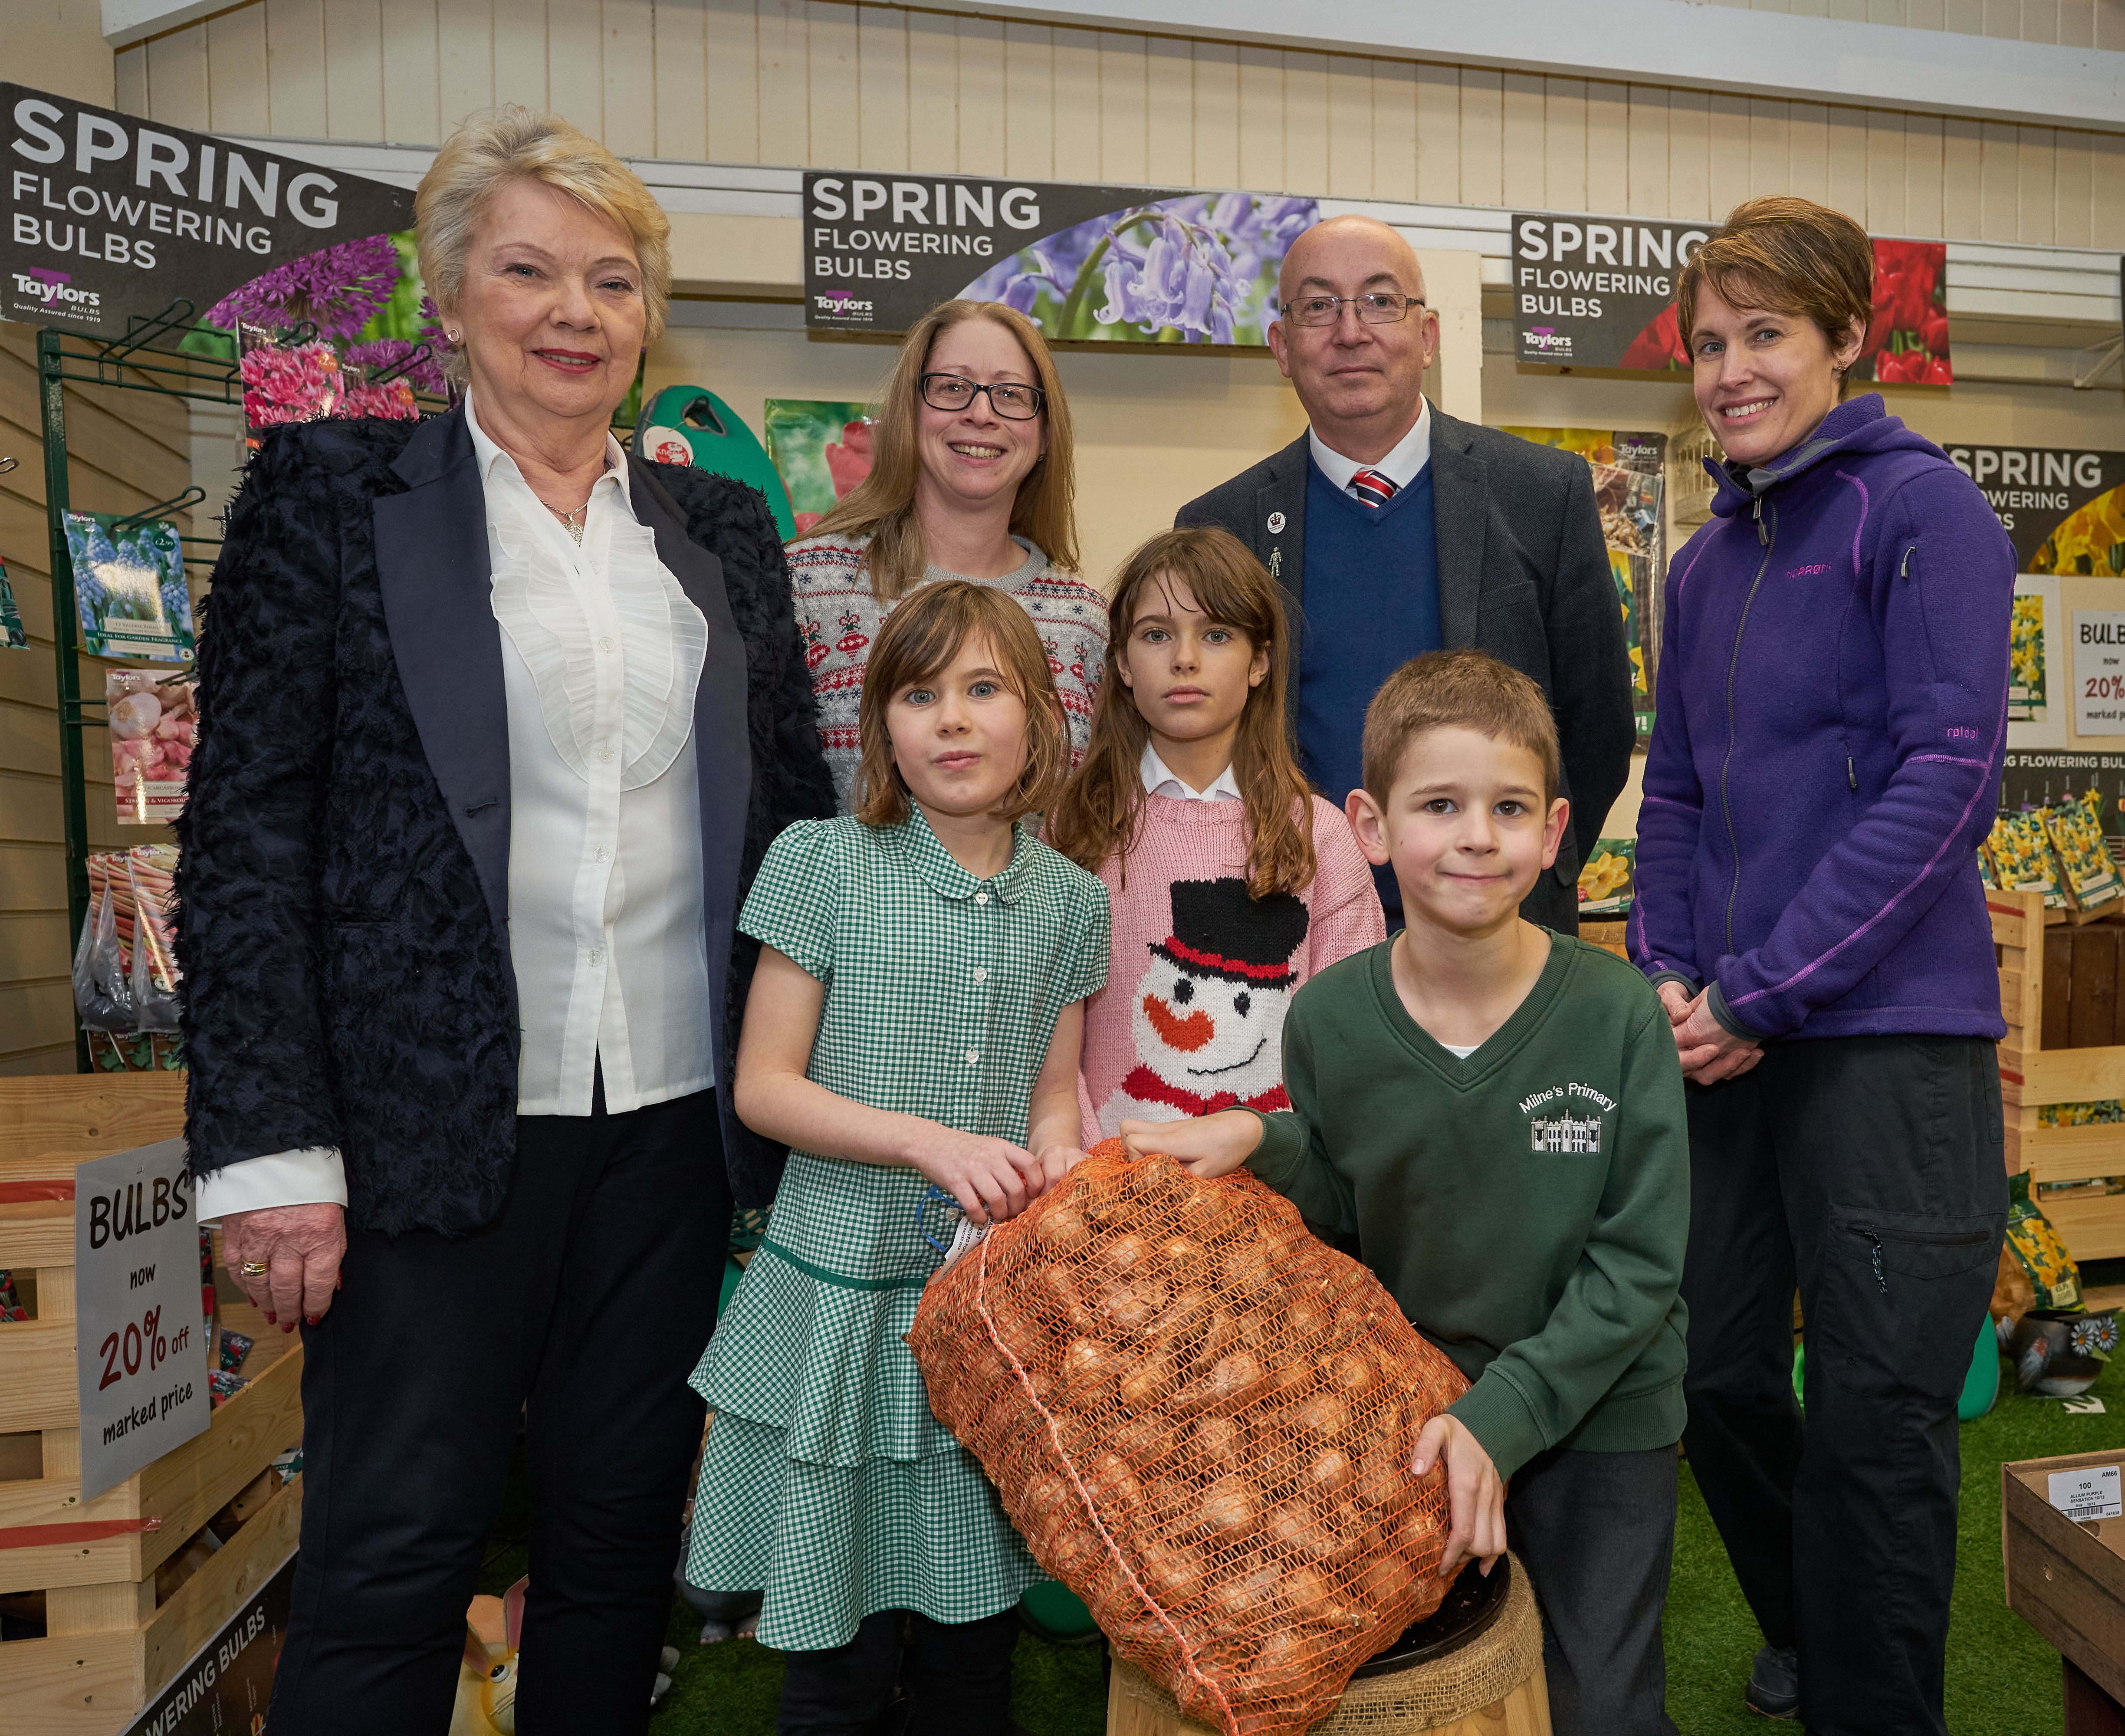 L-R Back - Christine Christie.  Samantha Williams Parent at Milnes, Cllr Marc Macrae and Parent Melissa McGregor along with children - L-R - Abigail and sister Isla McGregor with Nathan Williams.